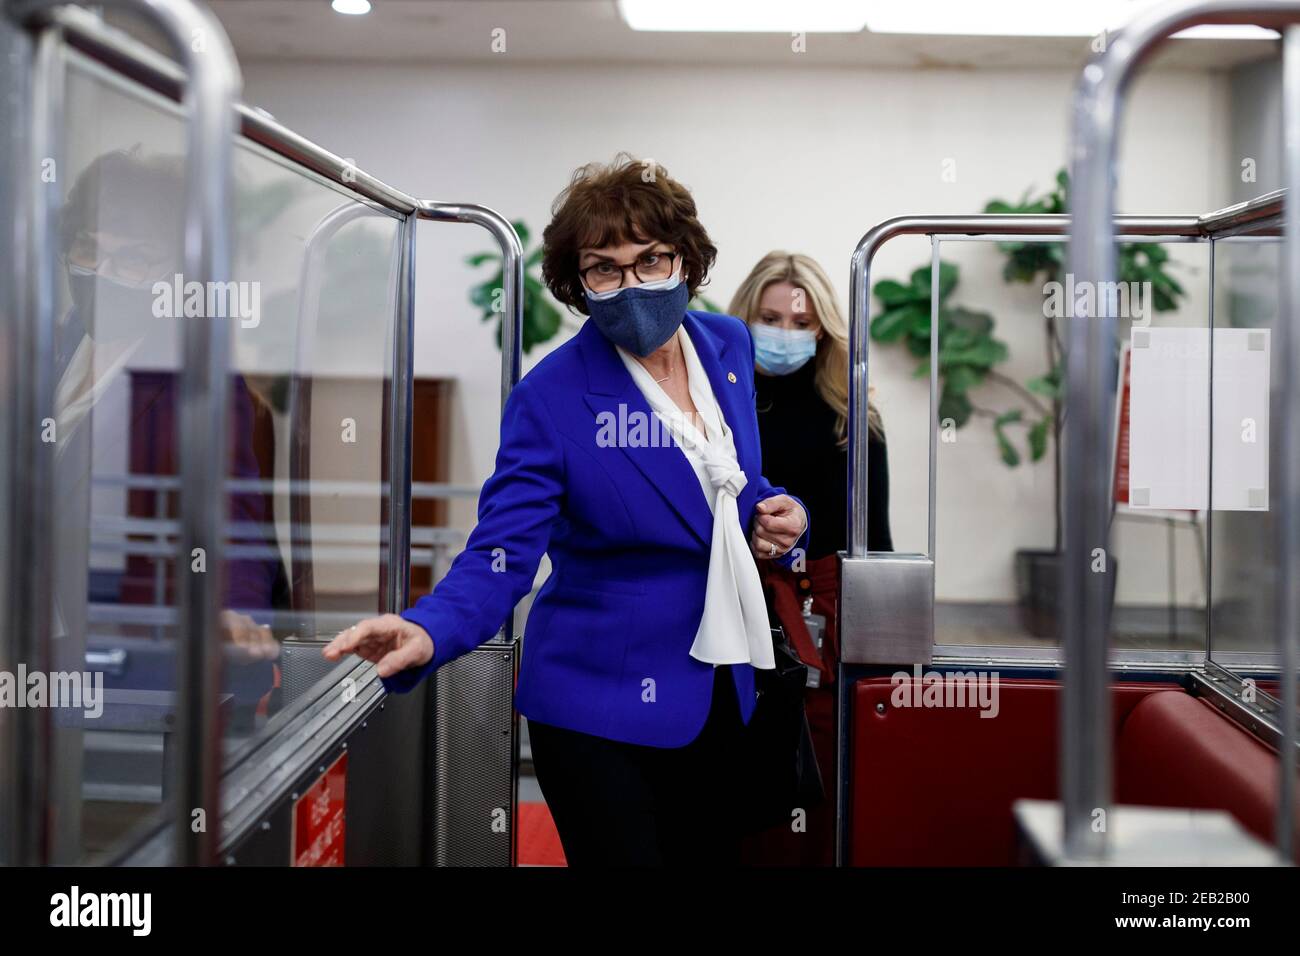 Senator Jacky Rosen, a Democrat from Nevada, wears a protective mask while boarding the Senate Subway at the U.S. Capitol in Washington, D.C., U.S., on Thursday, Feb. 11, 2021. House prosecutors used the second day of Donald Trump's impeachment trial to detail a months-long campaign by the former president to stoke hatred and encourage violence over the election results that they said culminated in the mob attack on the U.S. Capitol that he then did little to stop. Credit: Ting Shen - Pool via CNP | usage worldwide Stock Photo